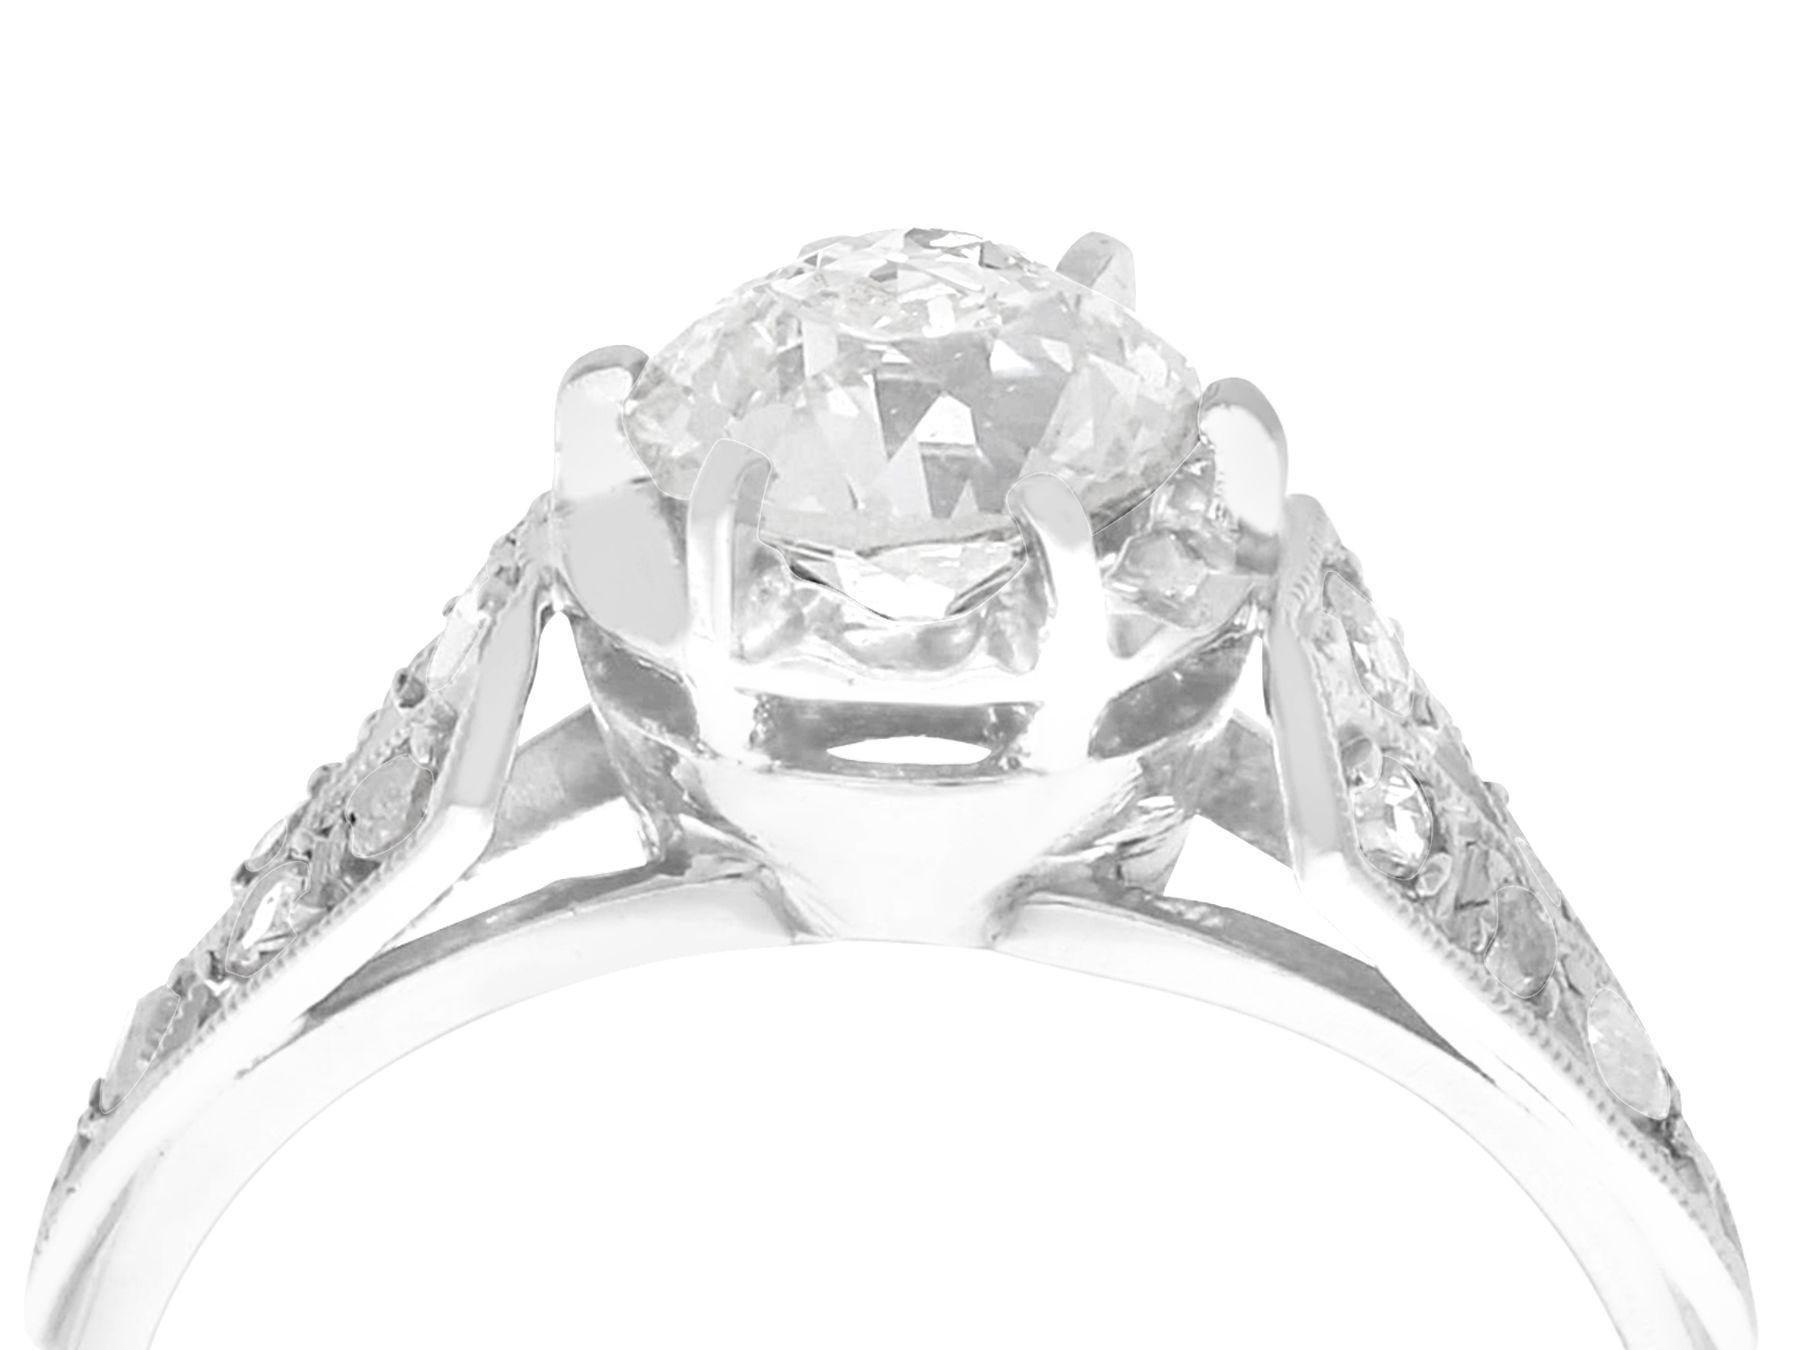 A stunning, fine and impressive 1 carat diamond and platinum solitaire engagement ring; part of our diverse antique jewelry and estate jewelry collections

This stunning, fine and impressive 1930s engagement ring has been crafted in platinum.

The